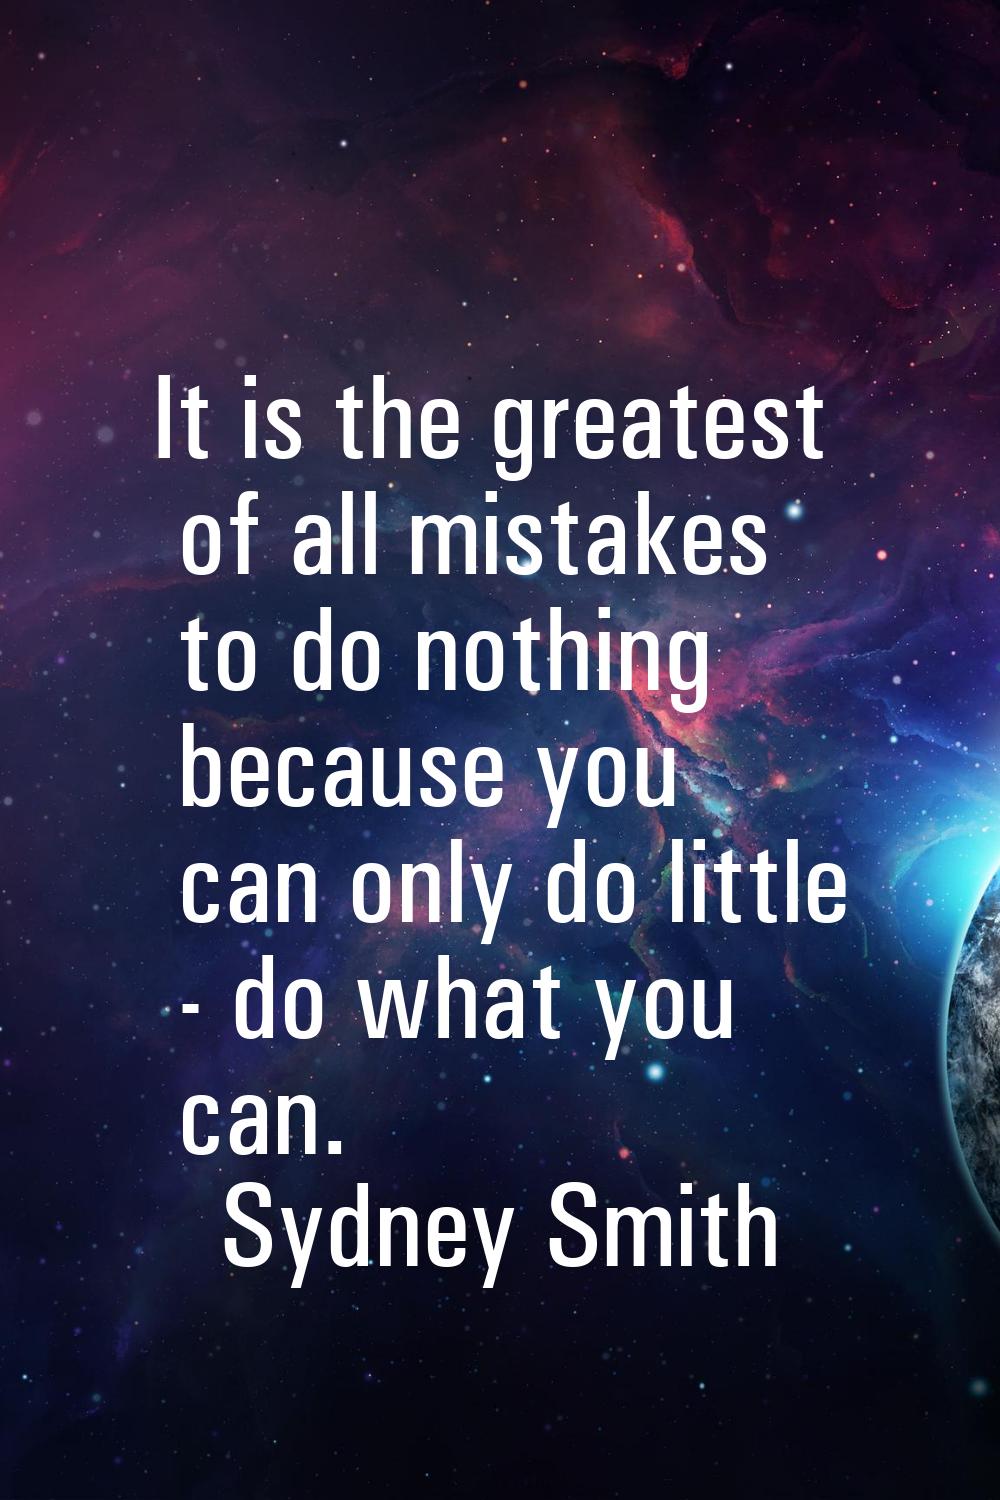 It is the greatest of all mistakes to do nothing because you can only do little - do what you can.